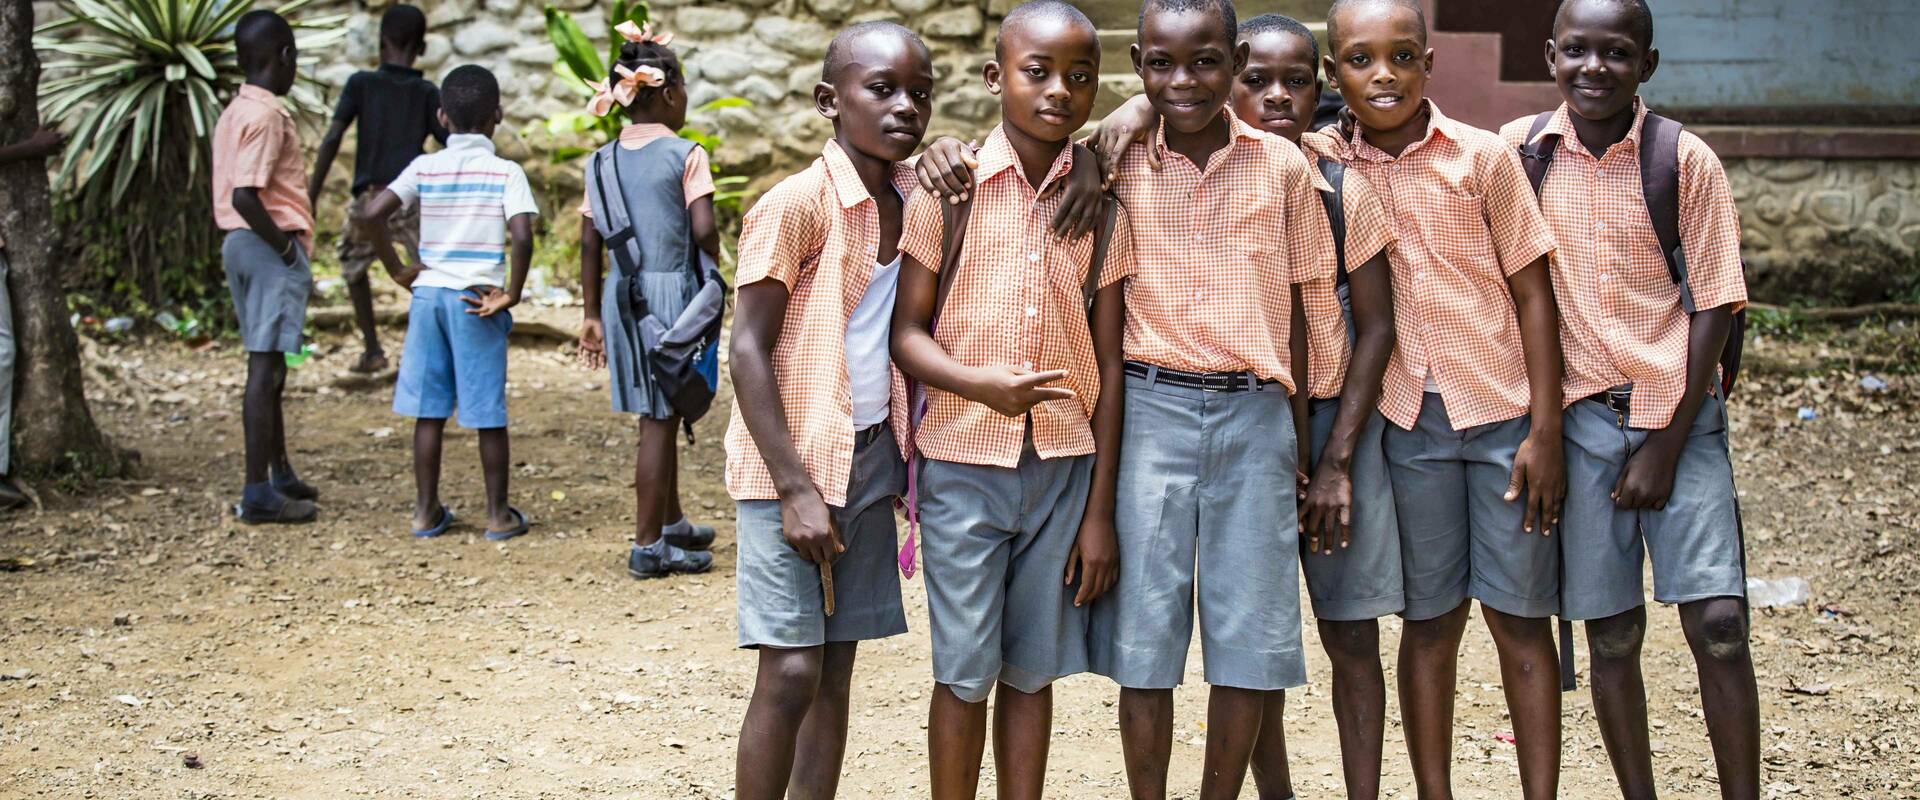 Image of students in Haiti